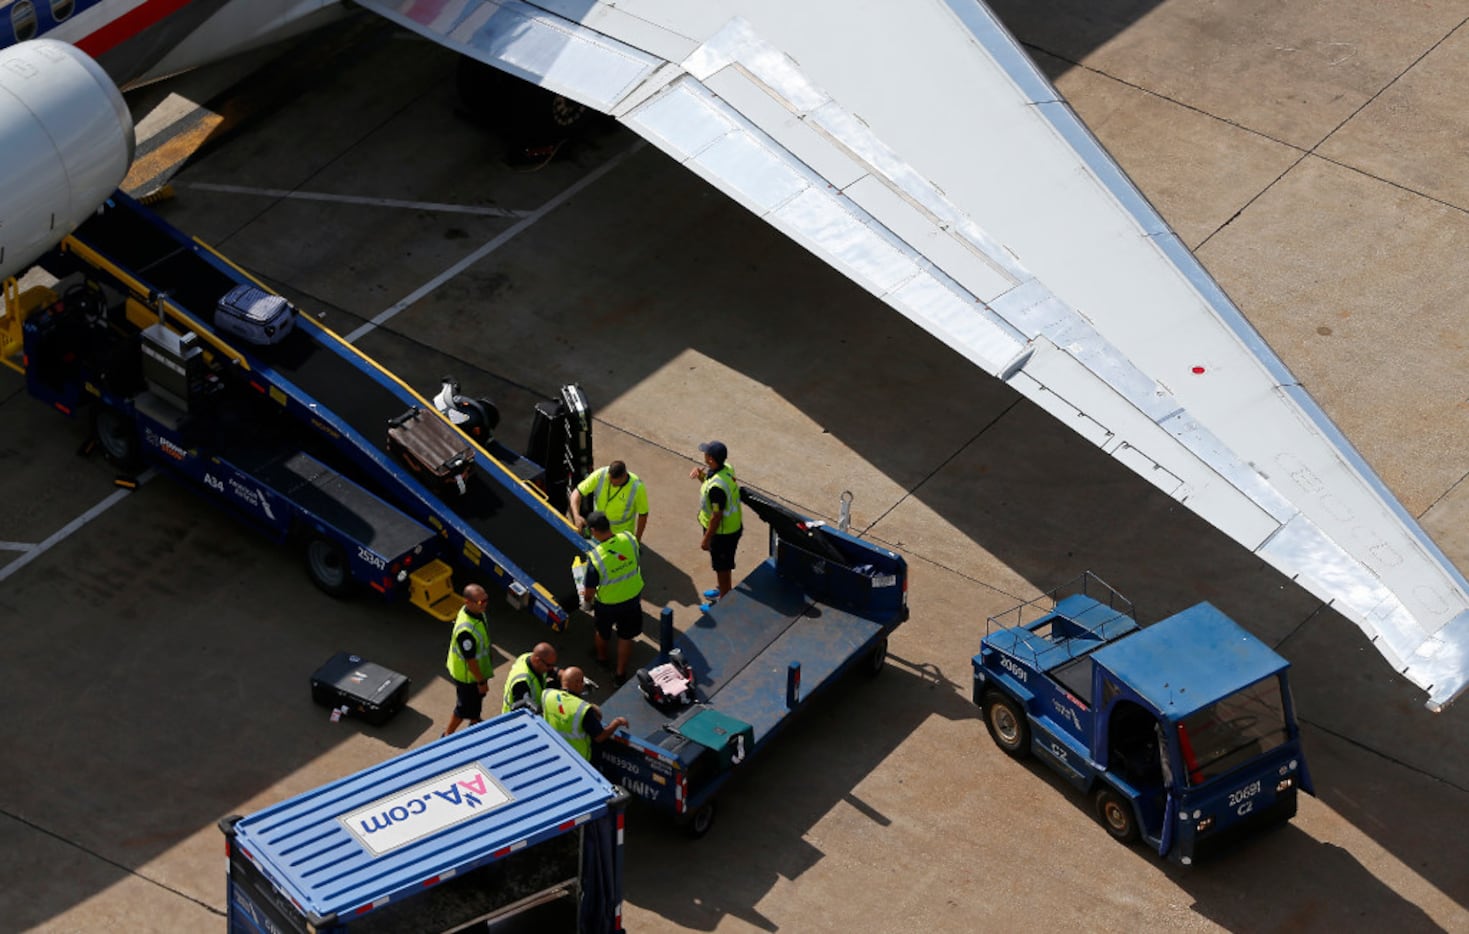 Members of the ground crew load bags onto an American Airlines jet at DFW International...